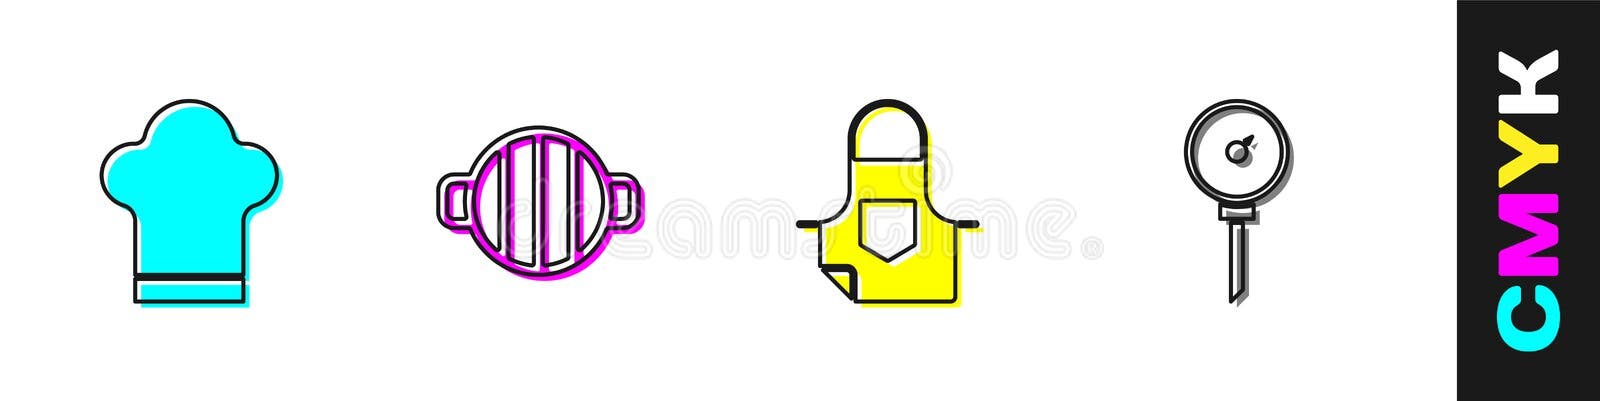 https://thumbs.dreamstime.com/b/set-chef-hat-barbecue-grill-kitchen-apron-thermometer-icon-vector-set-chef-hat-barbecue-grill-kitchen-apron-thermometer-268970626.jpg?w=1600